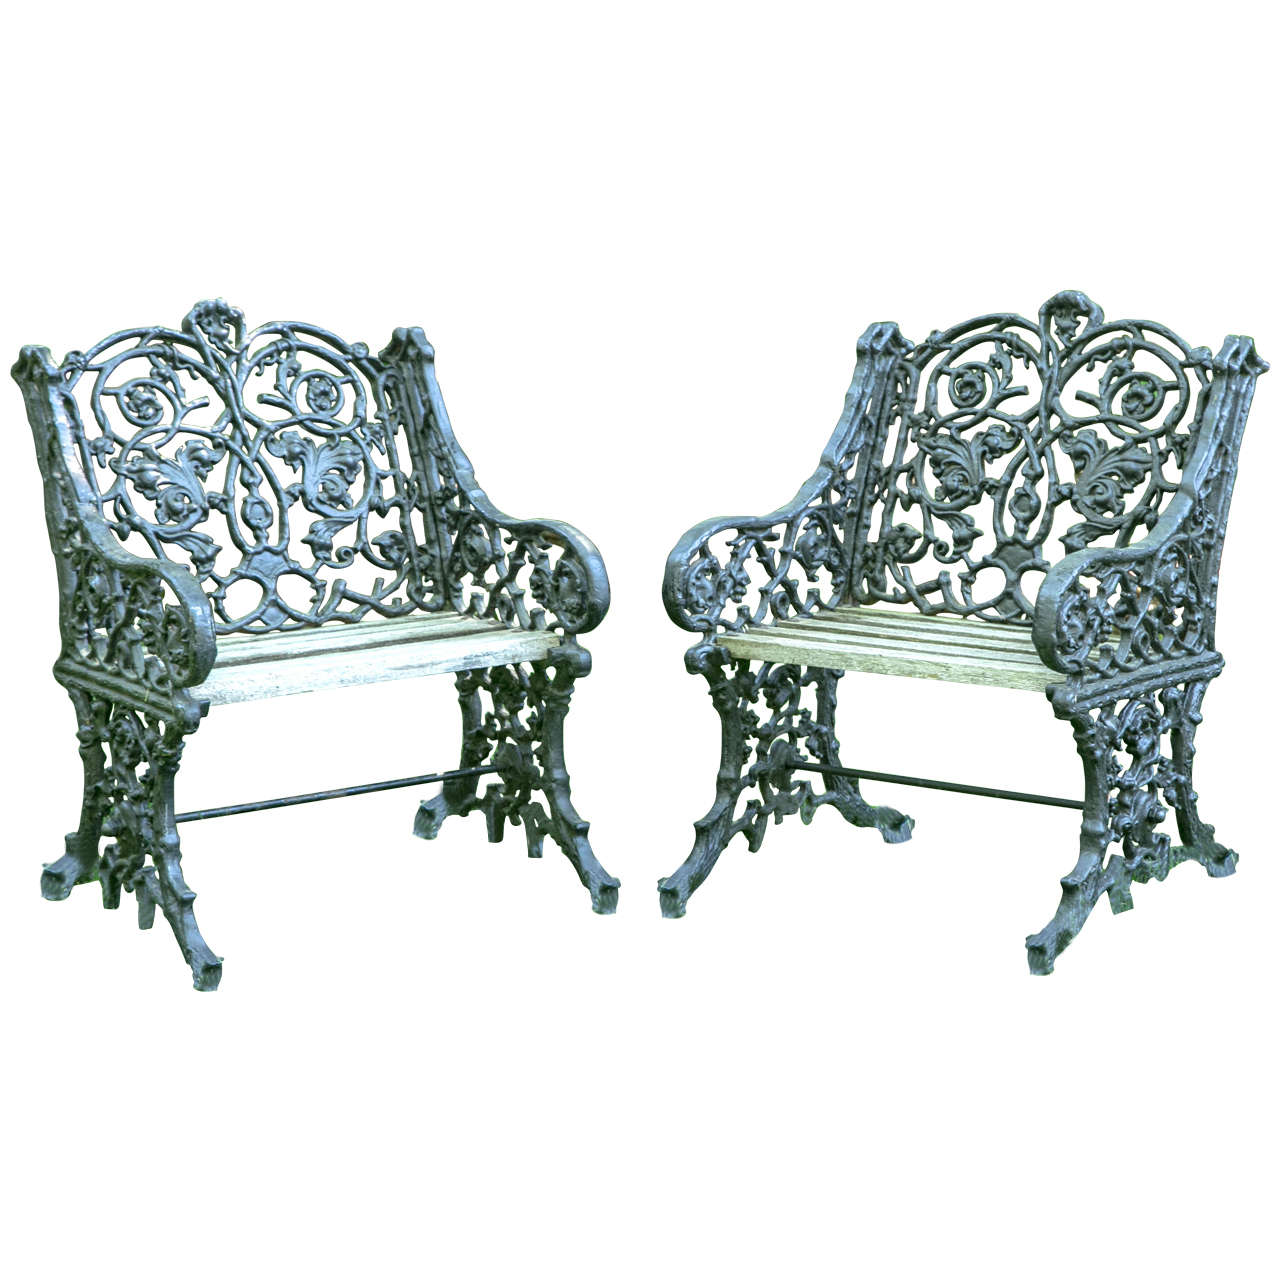 Pair of Cast Iron Botanical Chairs